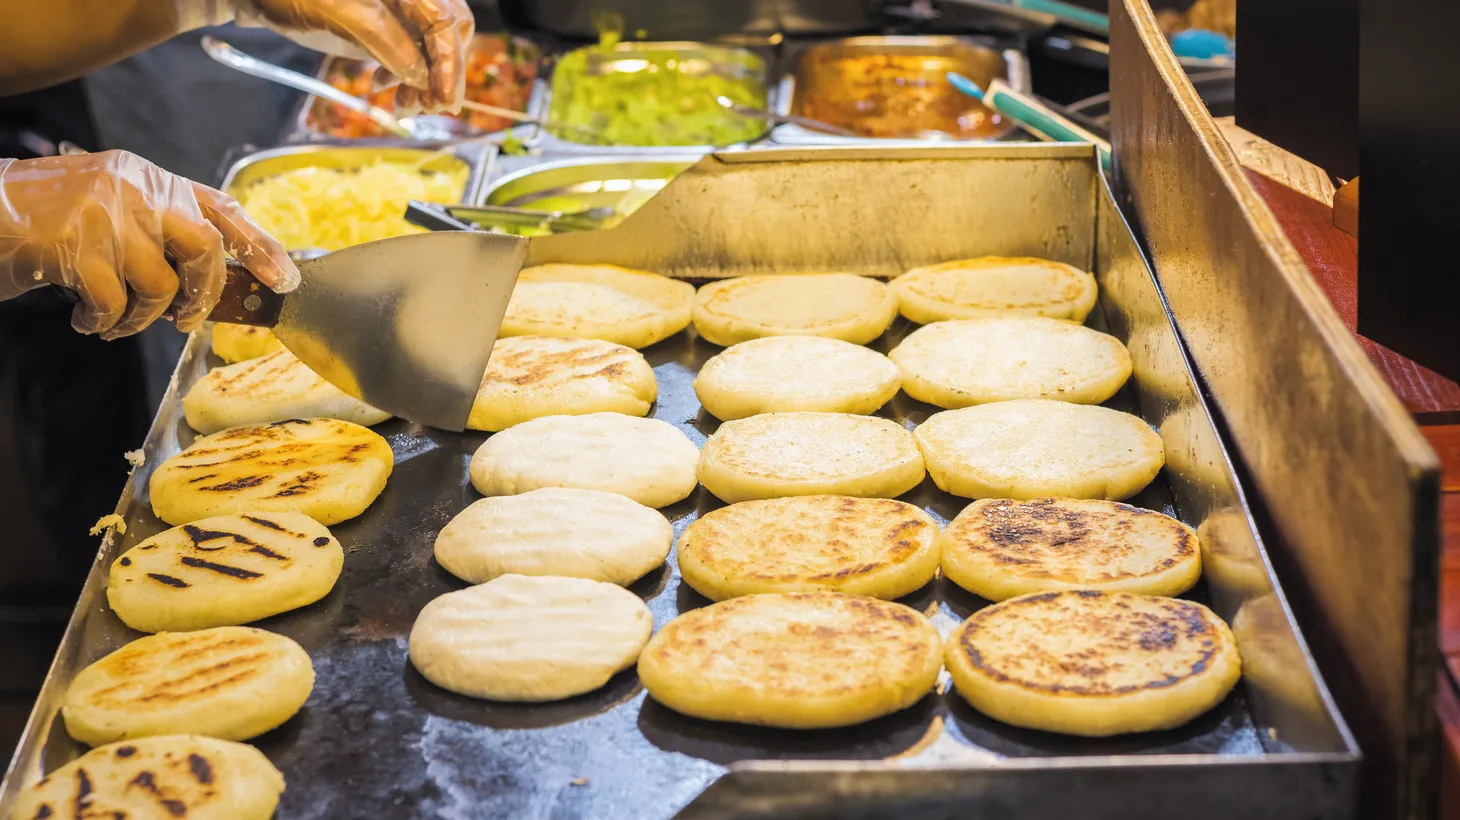 A street vendor's pupusas cook on a portable griddle. With complaints of trash and bad odors, street vendors along the El Salvador Corridor were forced to shut down. Community organizations like the Salvadoran American Leadership and Education Fund (SALEF) are working with vendors facing displacement.